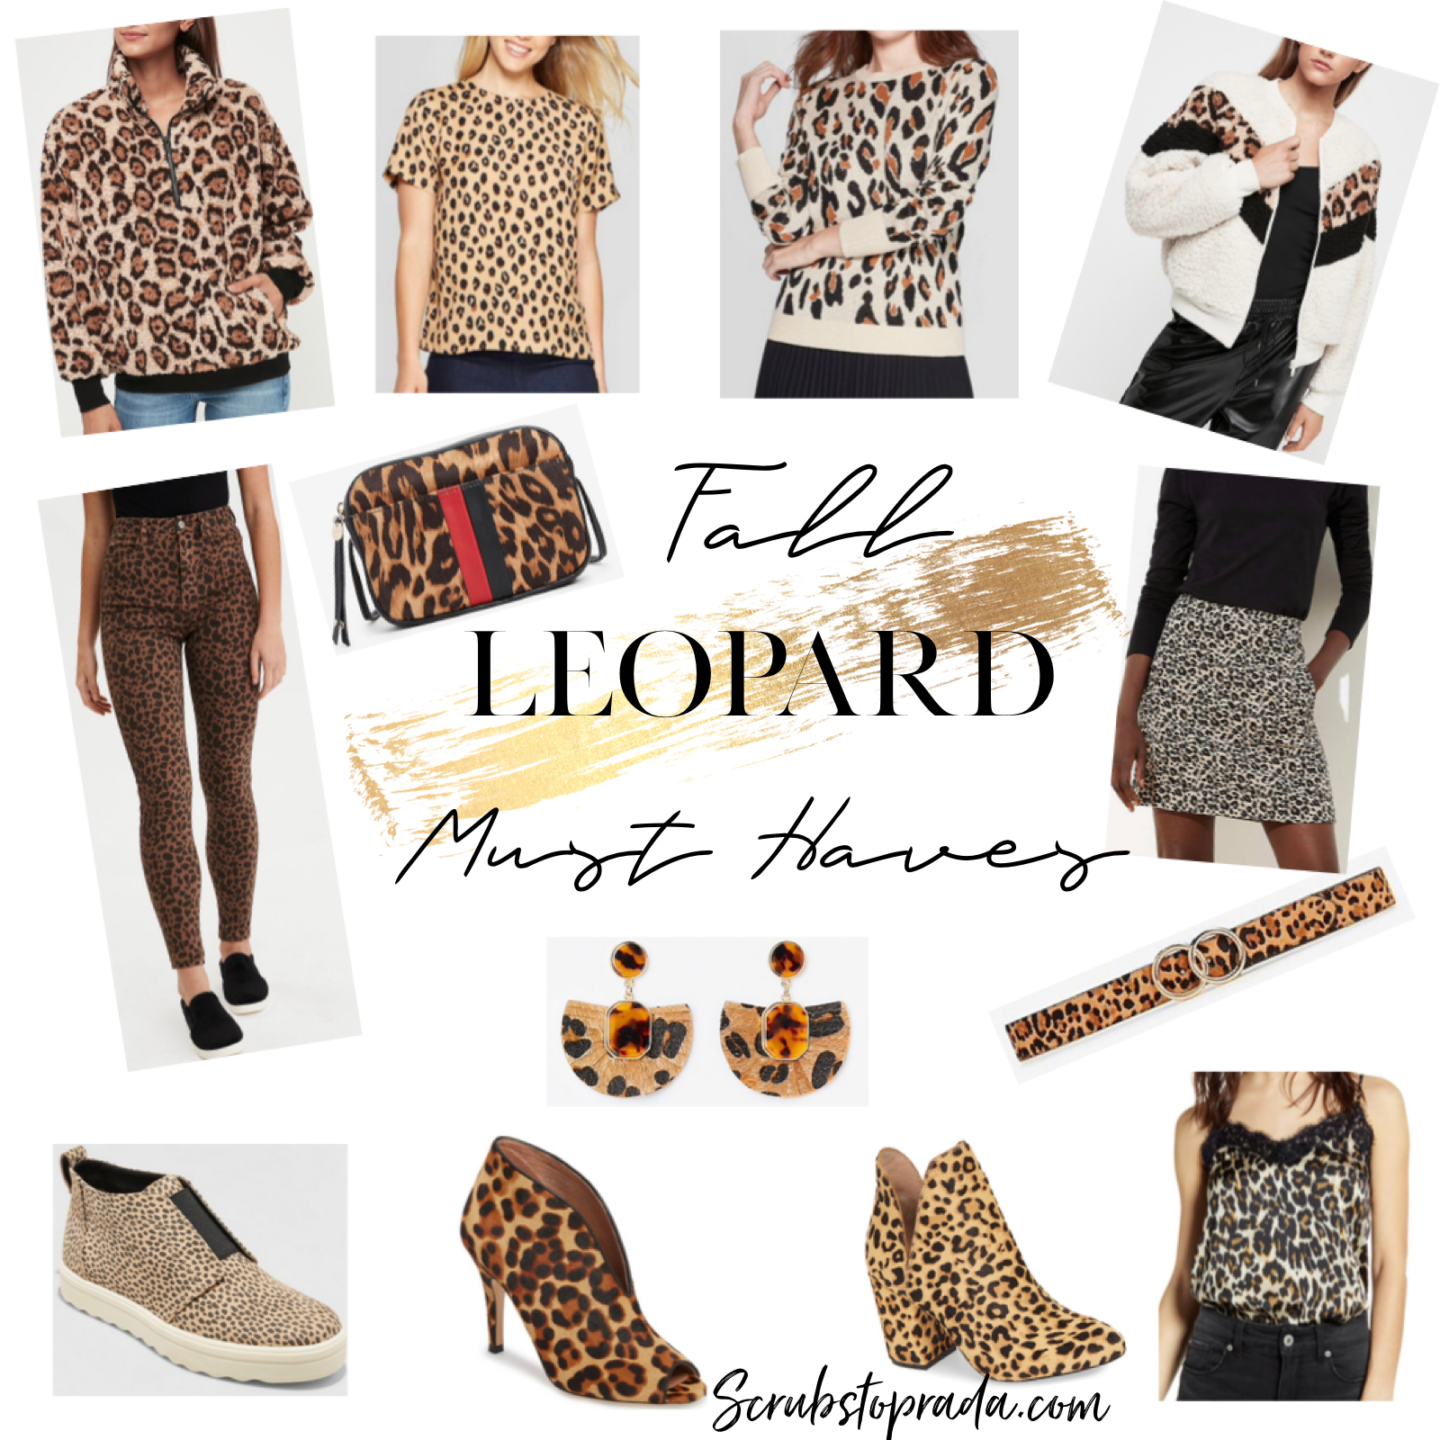 Fall Leopard Must-Haves – Scrubs to Prada